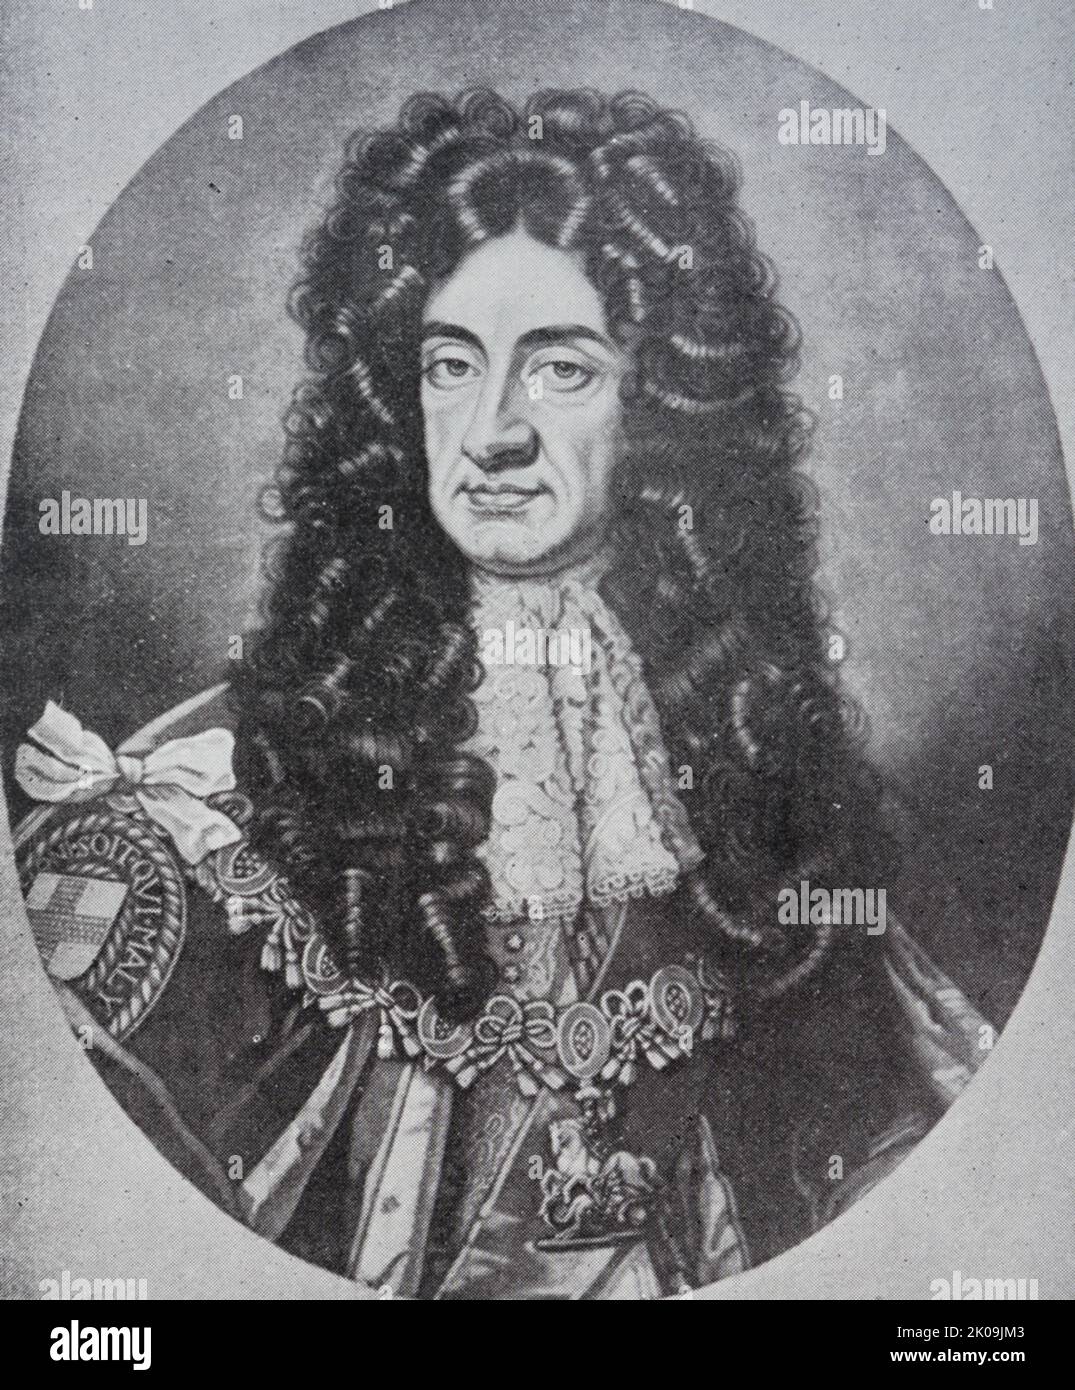 Charles II (29 May 1630 - 6 February 1685) was King of Scotland from 1649 until 1651, and King of Scotland, England and Ireland from the 1660 Restoration of the monarchy until his death in 1685. Stock Photo